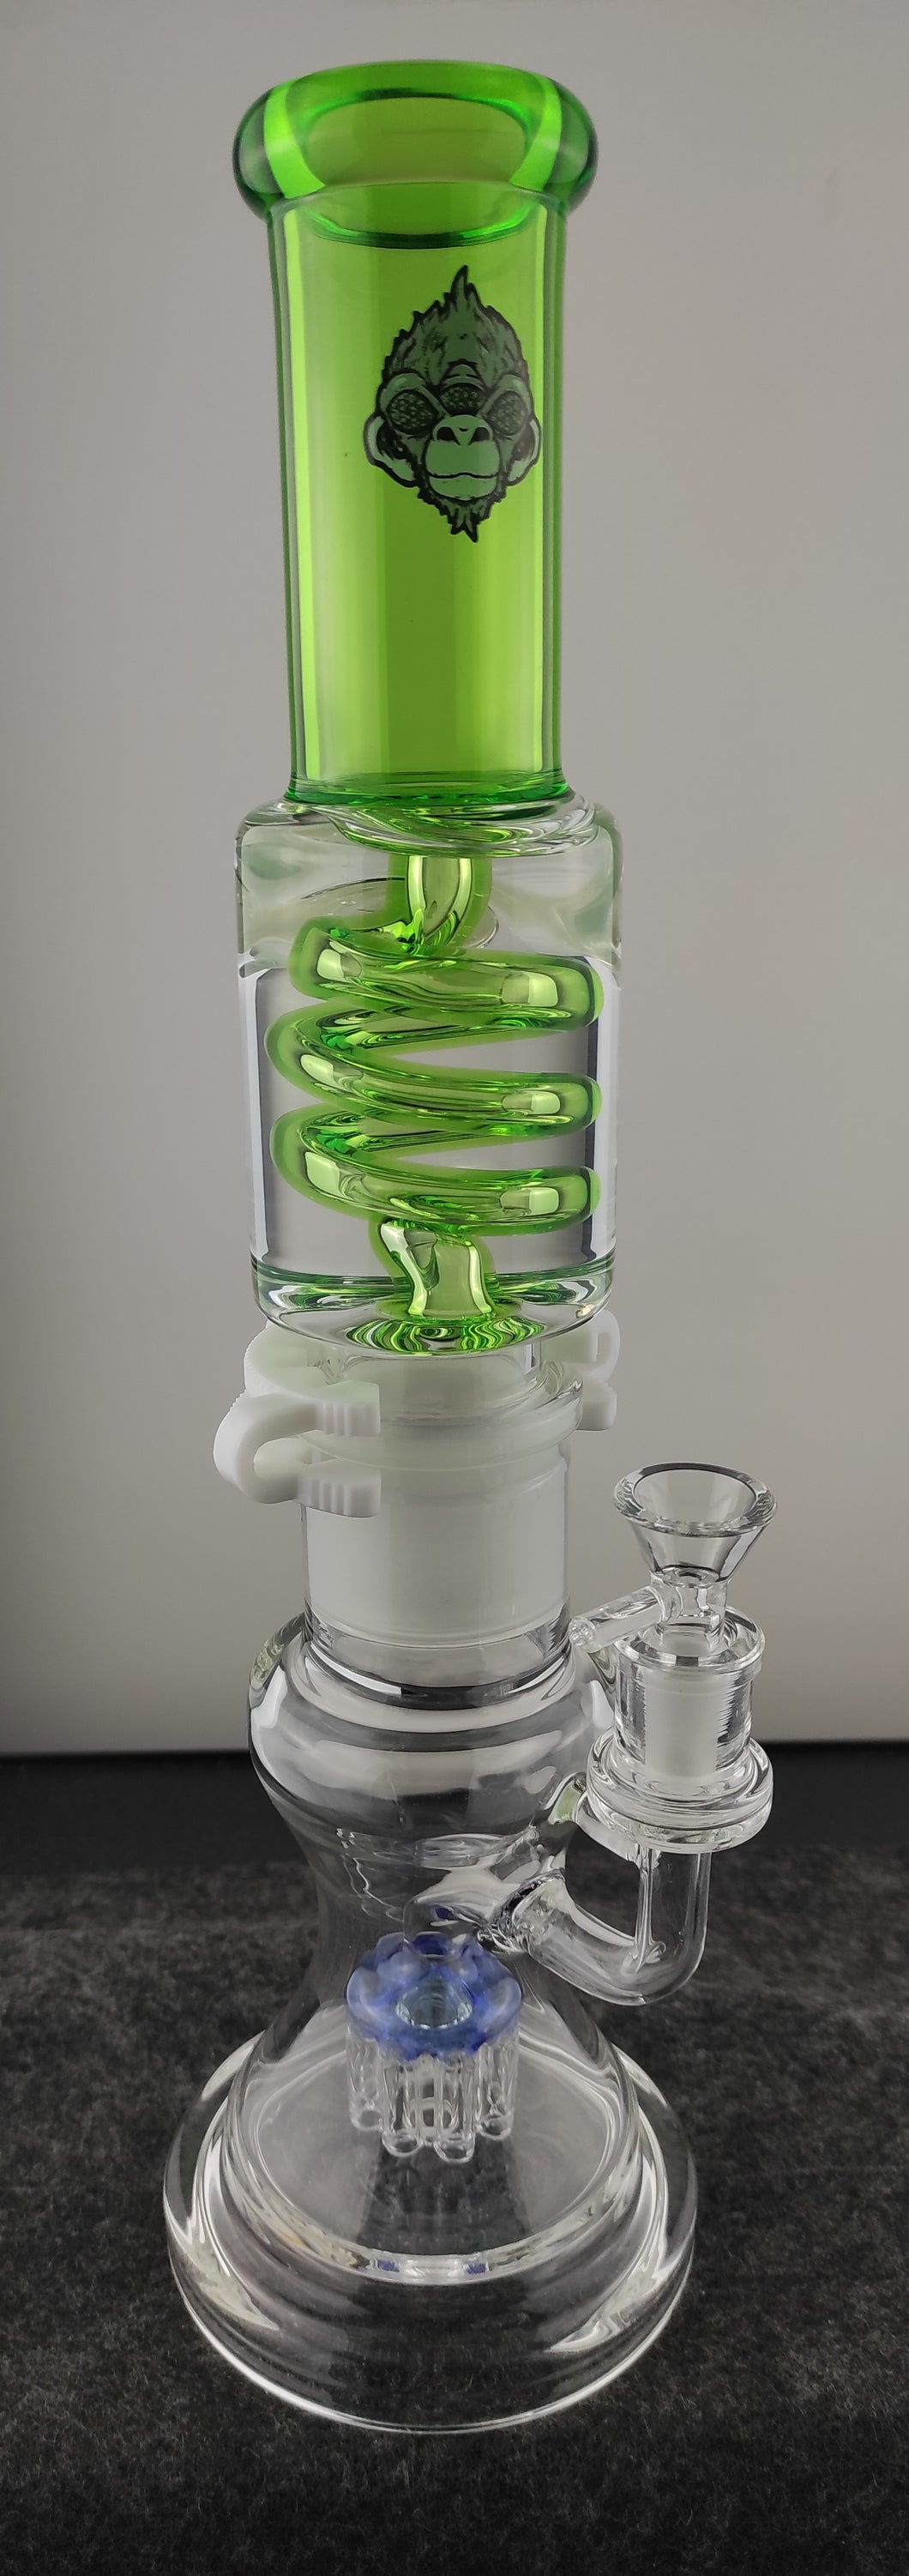 AFM Glycerin Coil 10-Arm Tree Pipe